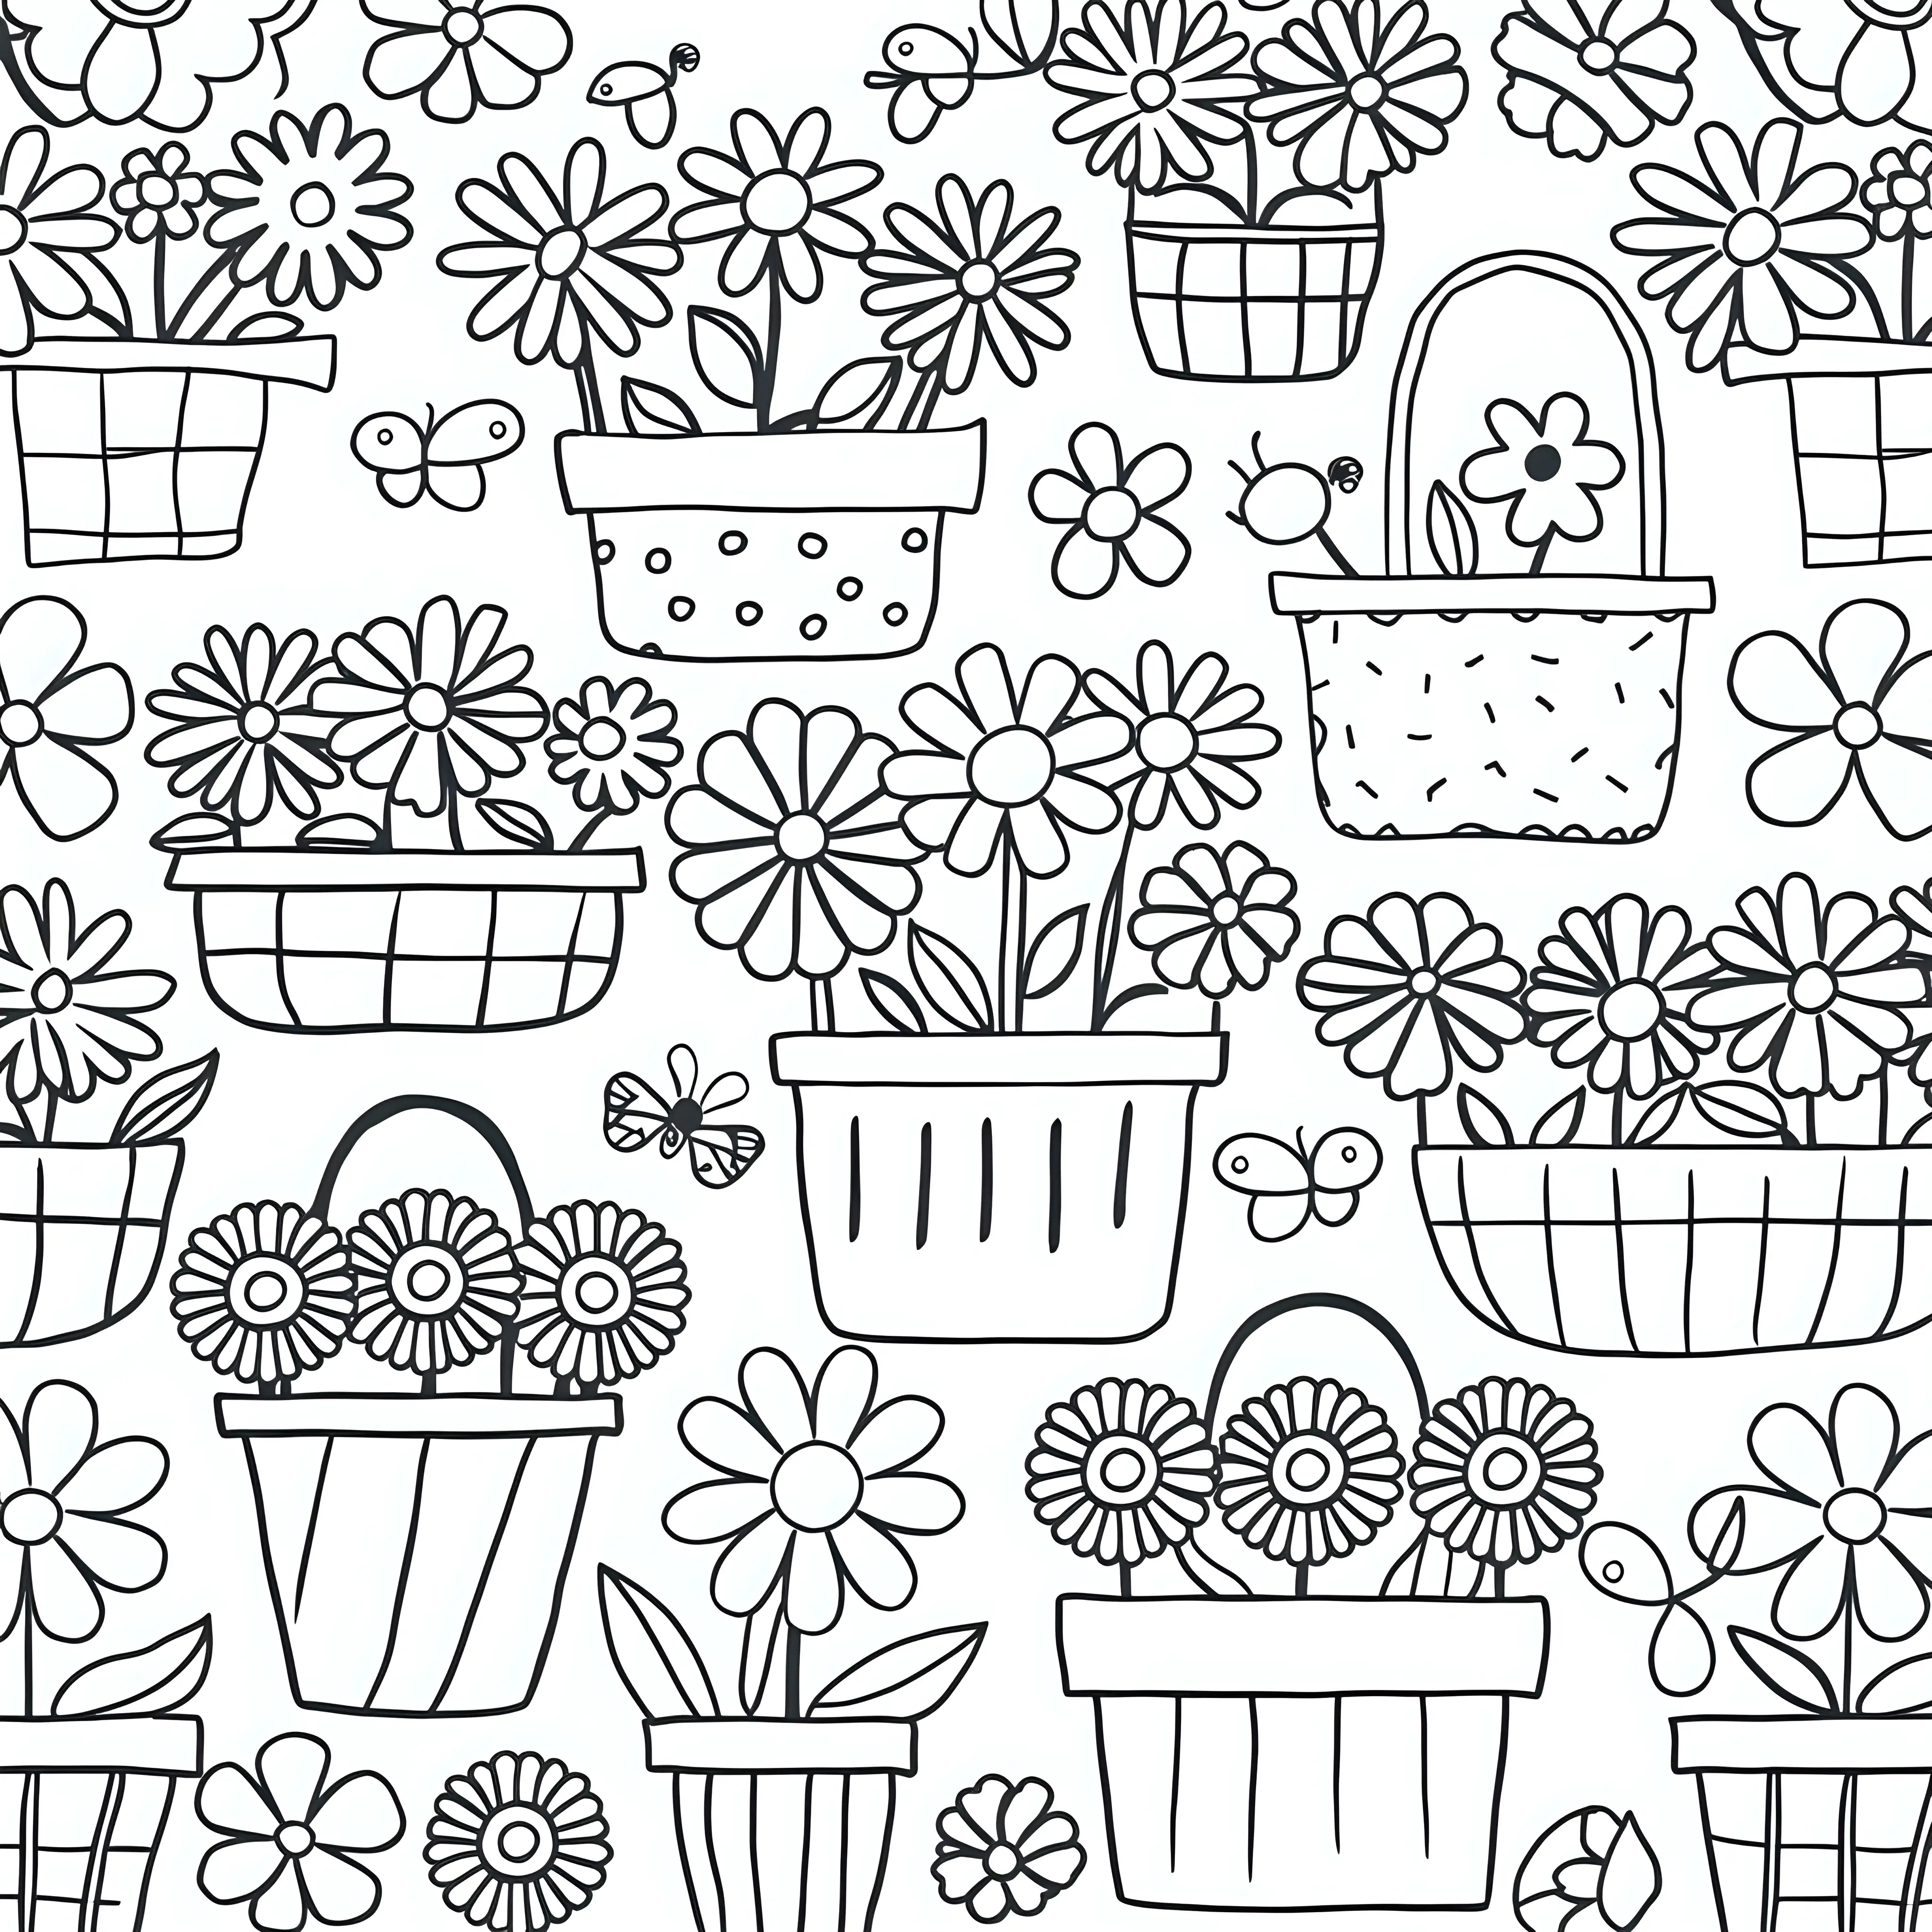 simple cute flower baskets pattern coloring page. all in black and white. white background. should cover the whole page.